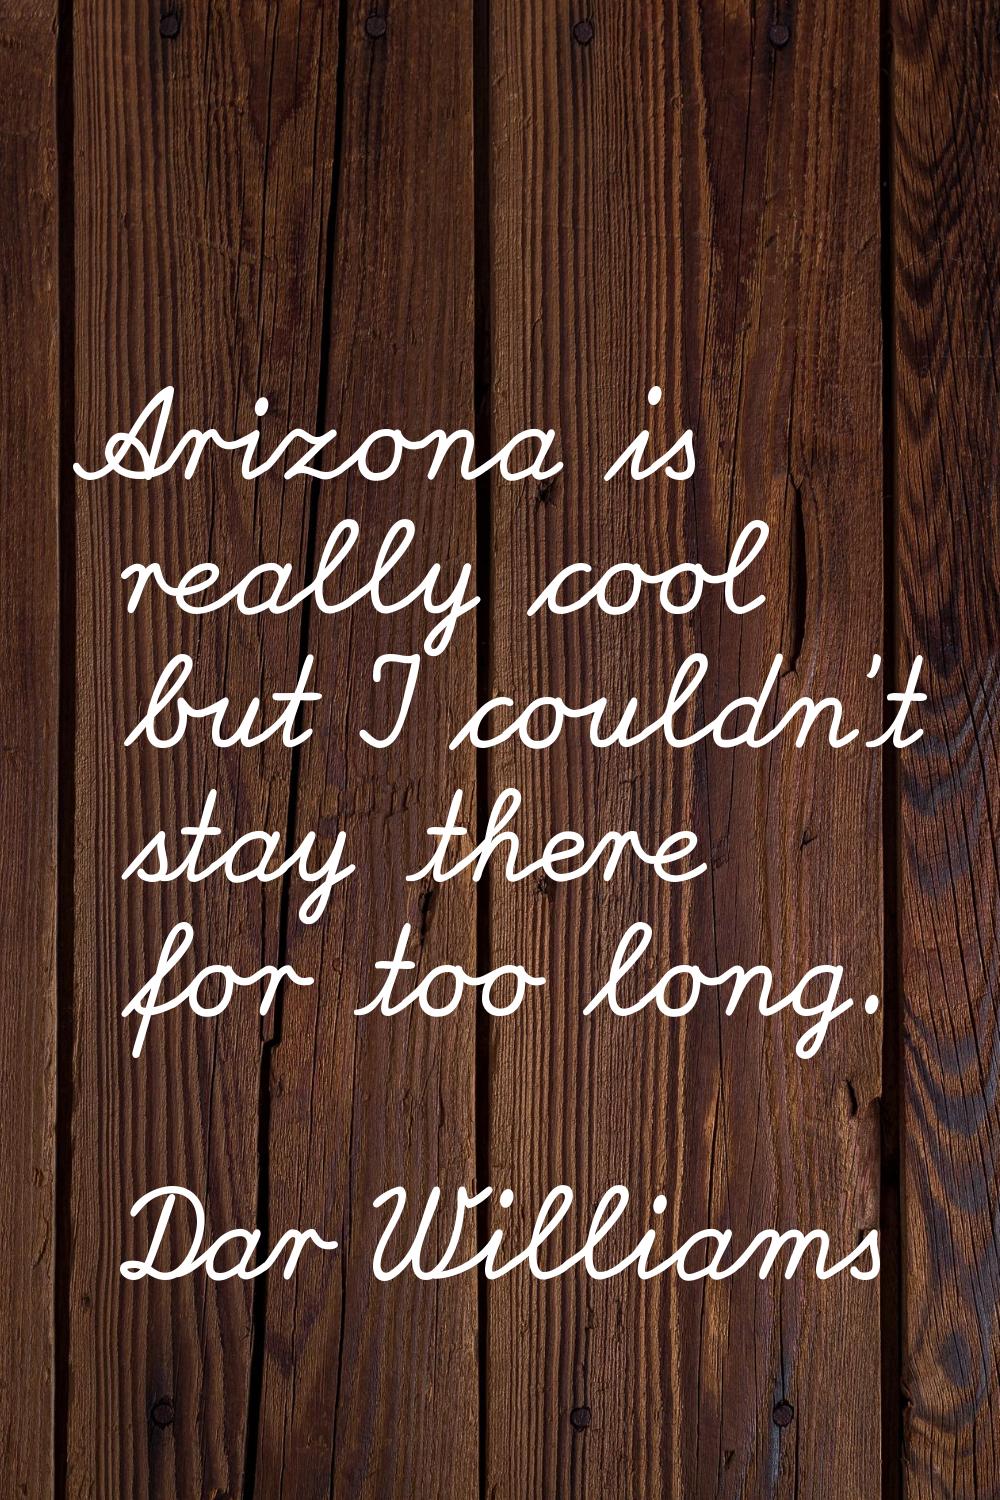 Arizona is really cool but I couldn't stay there for too long.